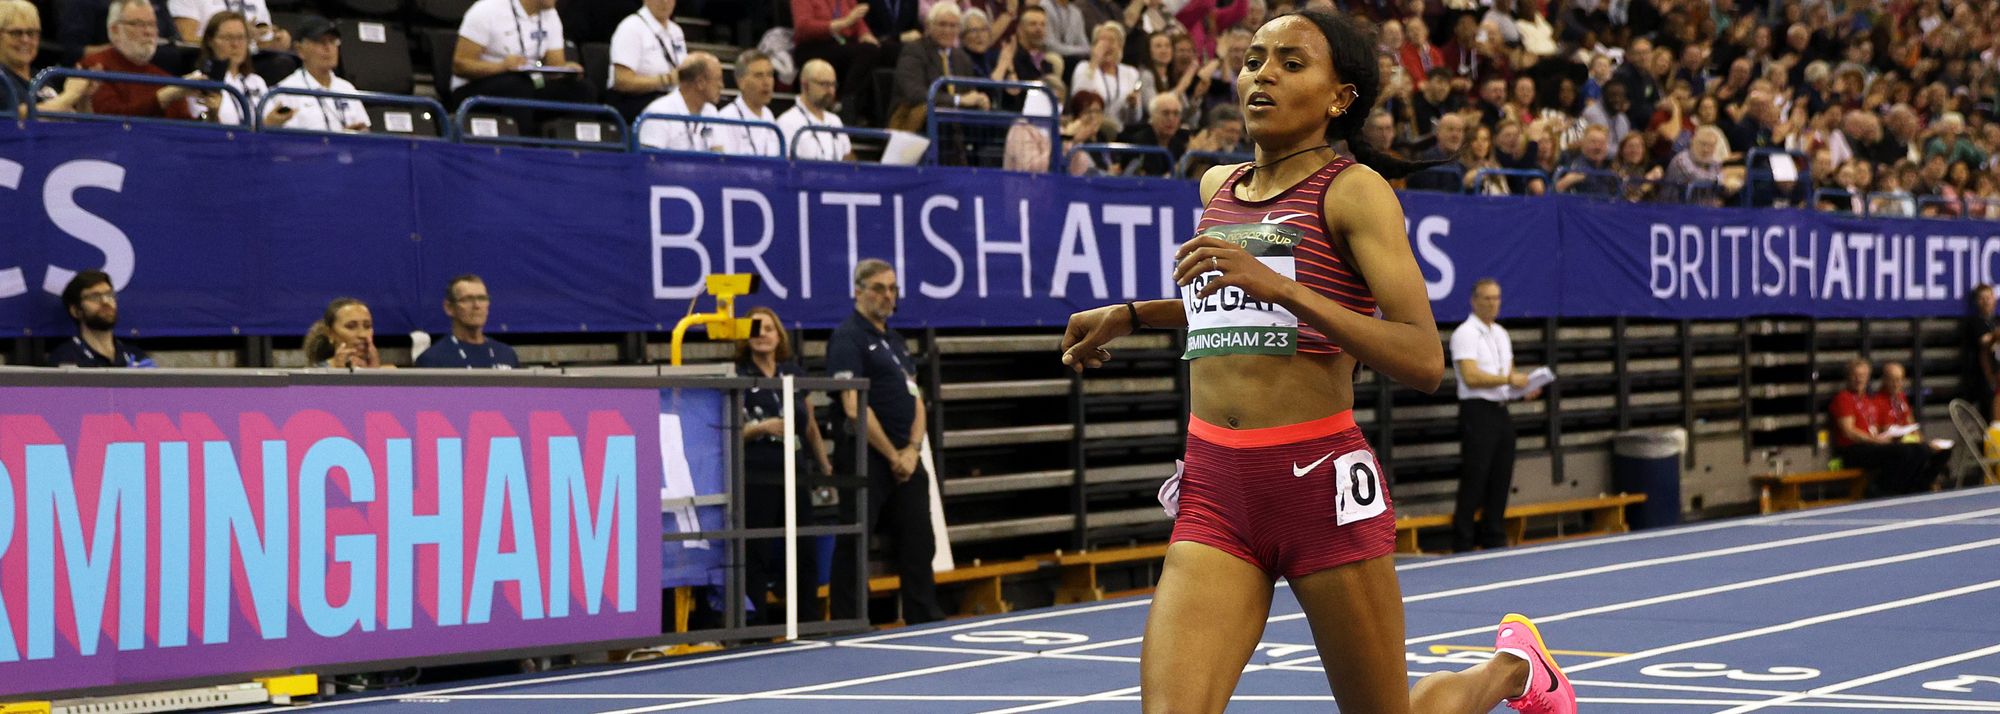 Gudaf Tsegay stormed to the second-fastest women’s indoor 3000m performance of all time on an afternoon that saw World Indoor Tour titles won, and many meeting and national records fall